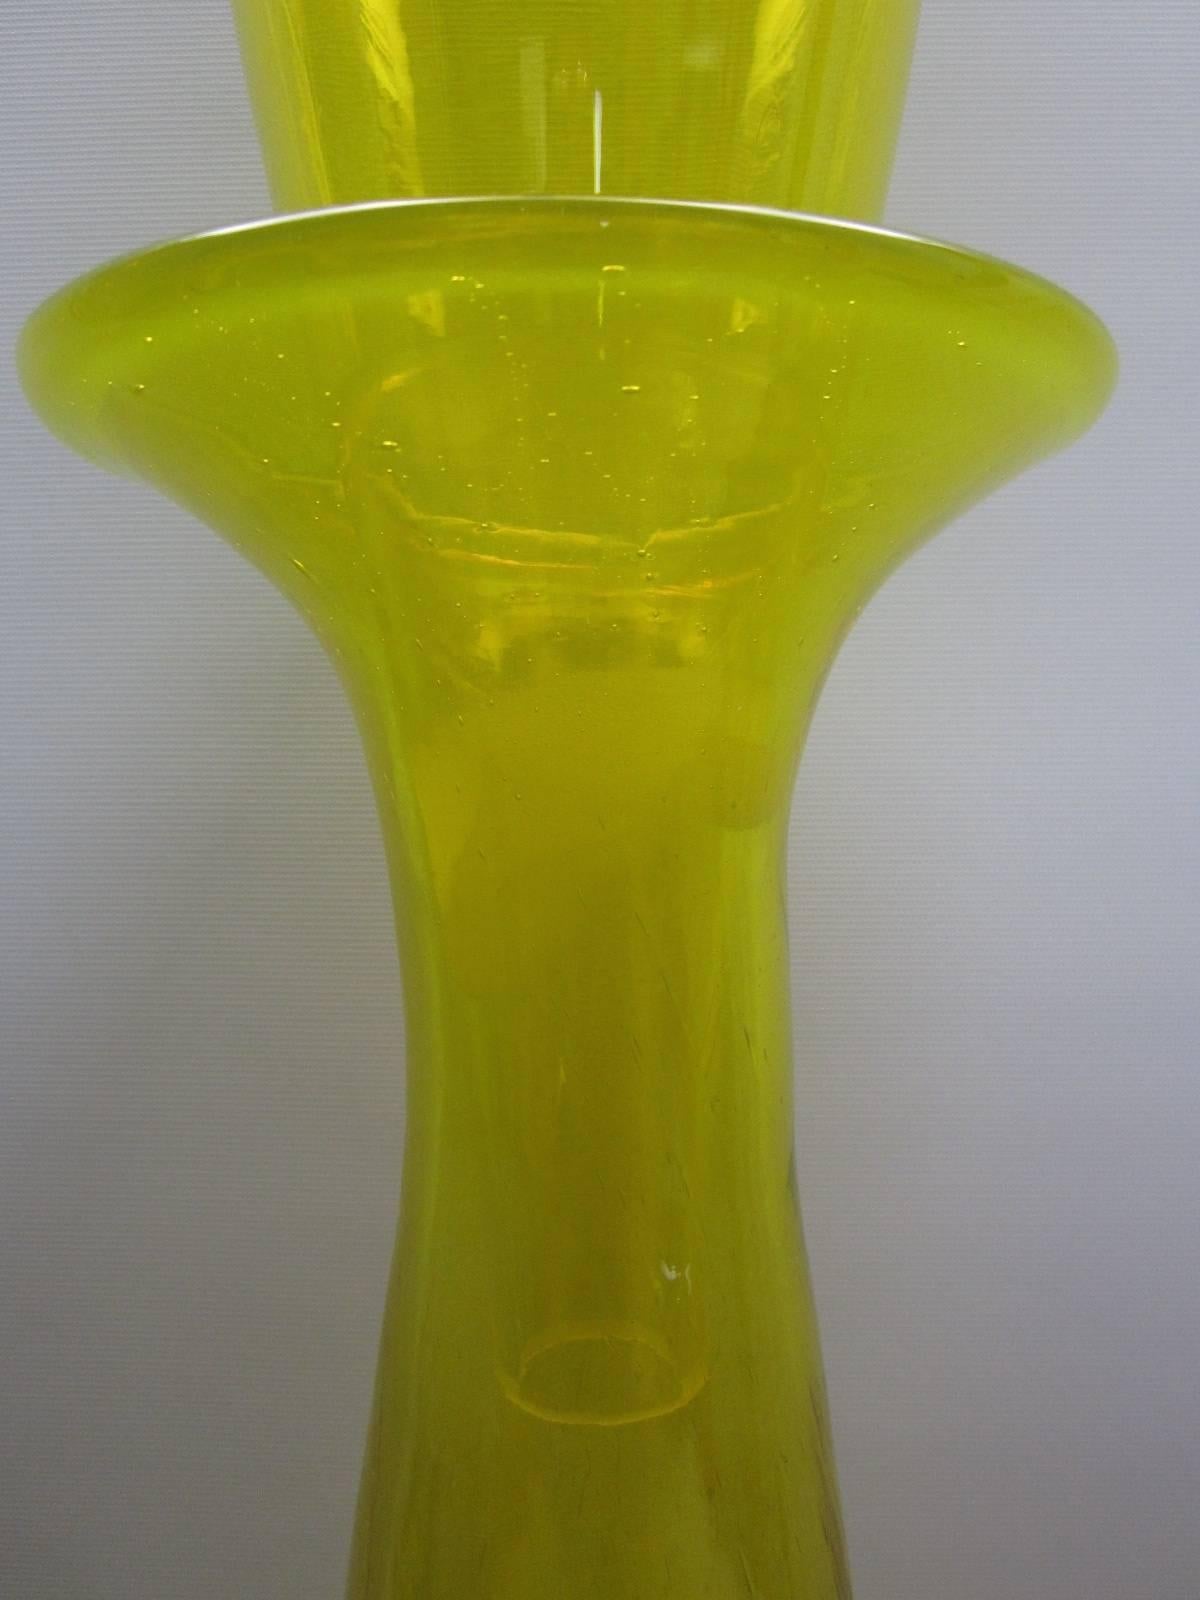 Large Jonquil Blenko Architectural Floor Decanter with Stopper by Wayne Husted In Excellent Condition For Sale In Miami, FL